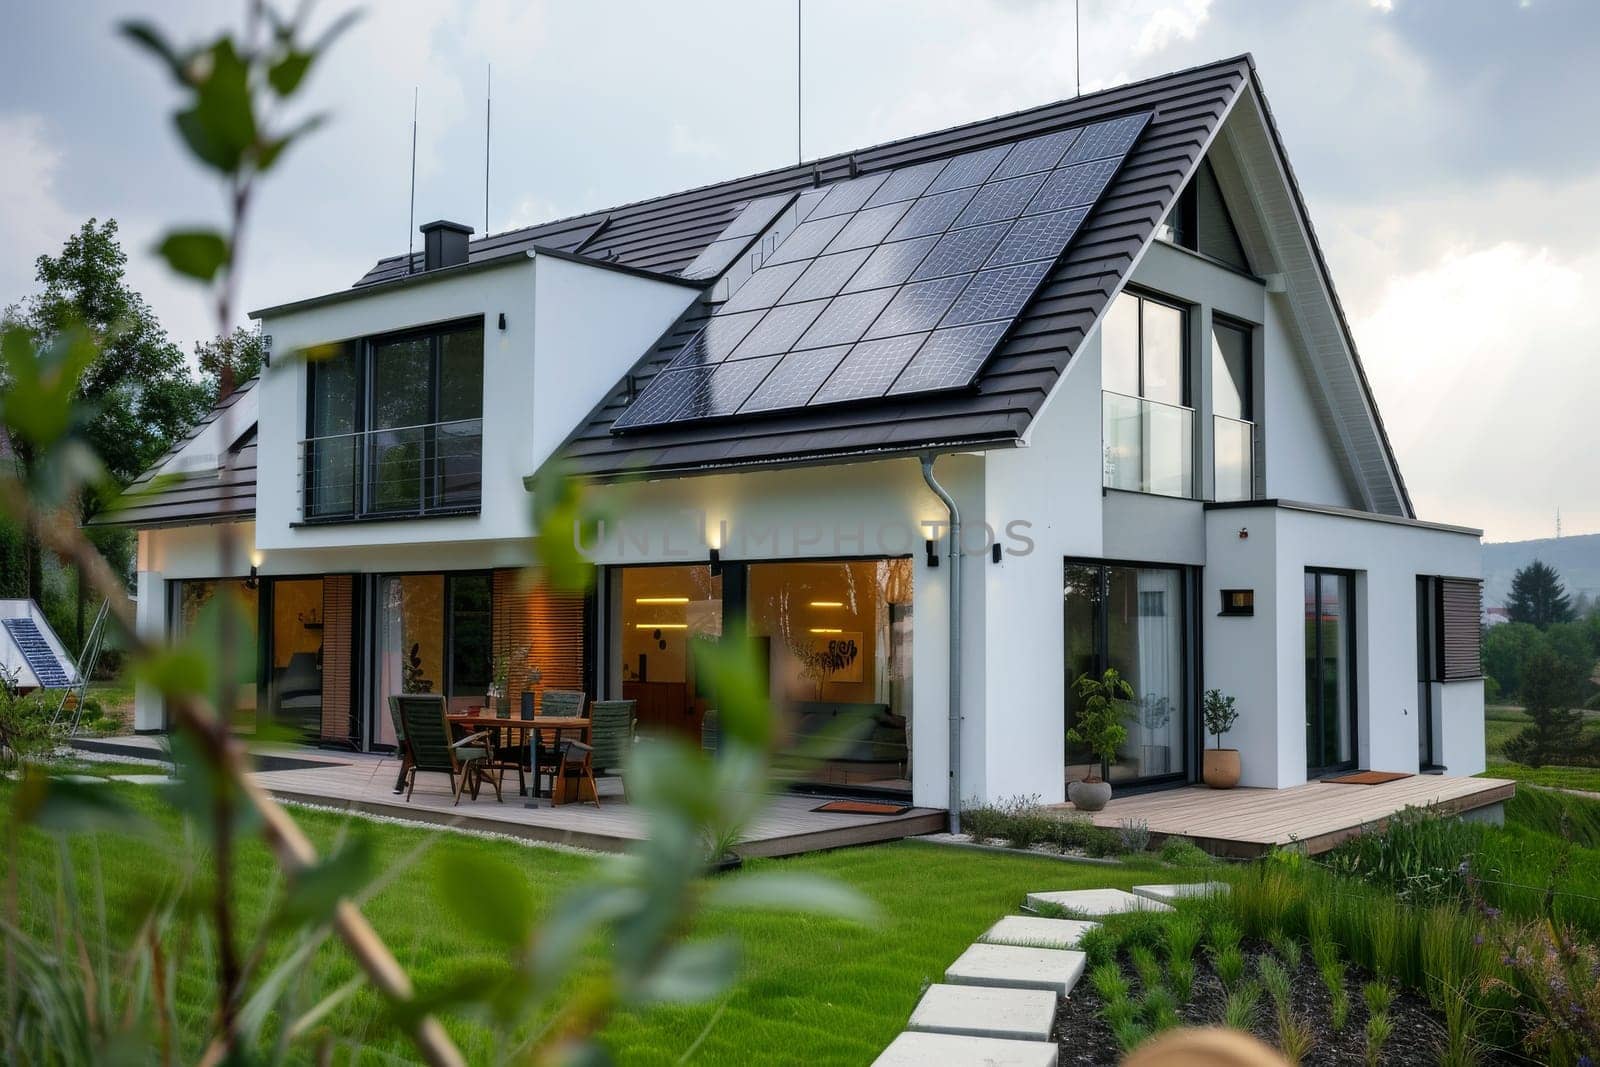 A large house with a lot of windows and a solar panel on the roof. The house is surrounded by a lush green lawn and a garden. The house has a modern and eco-friendly design